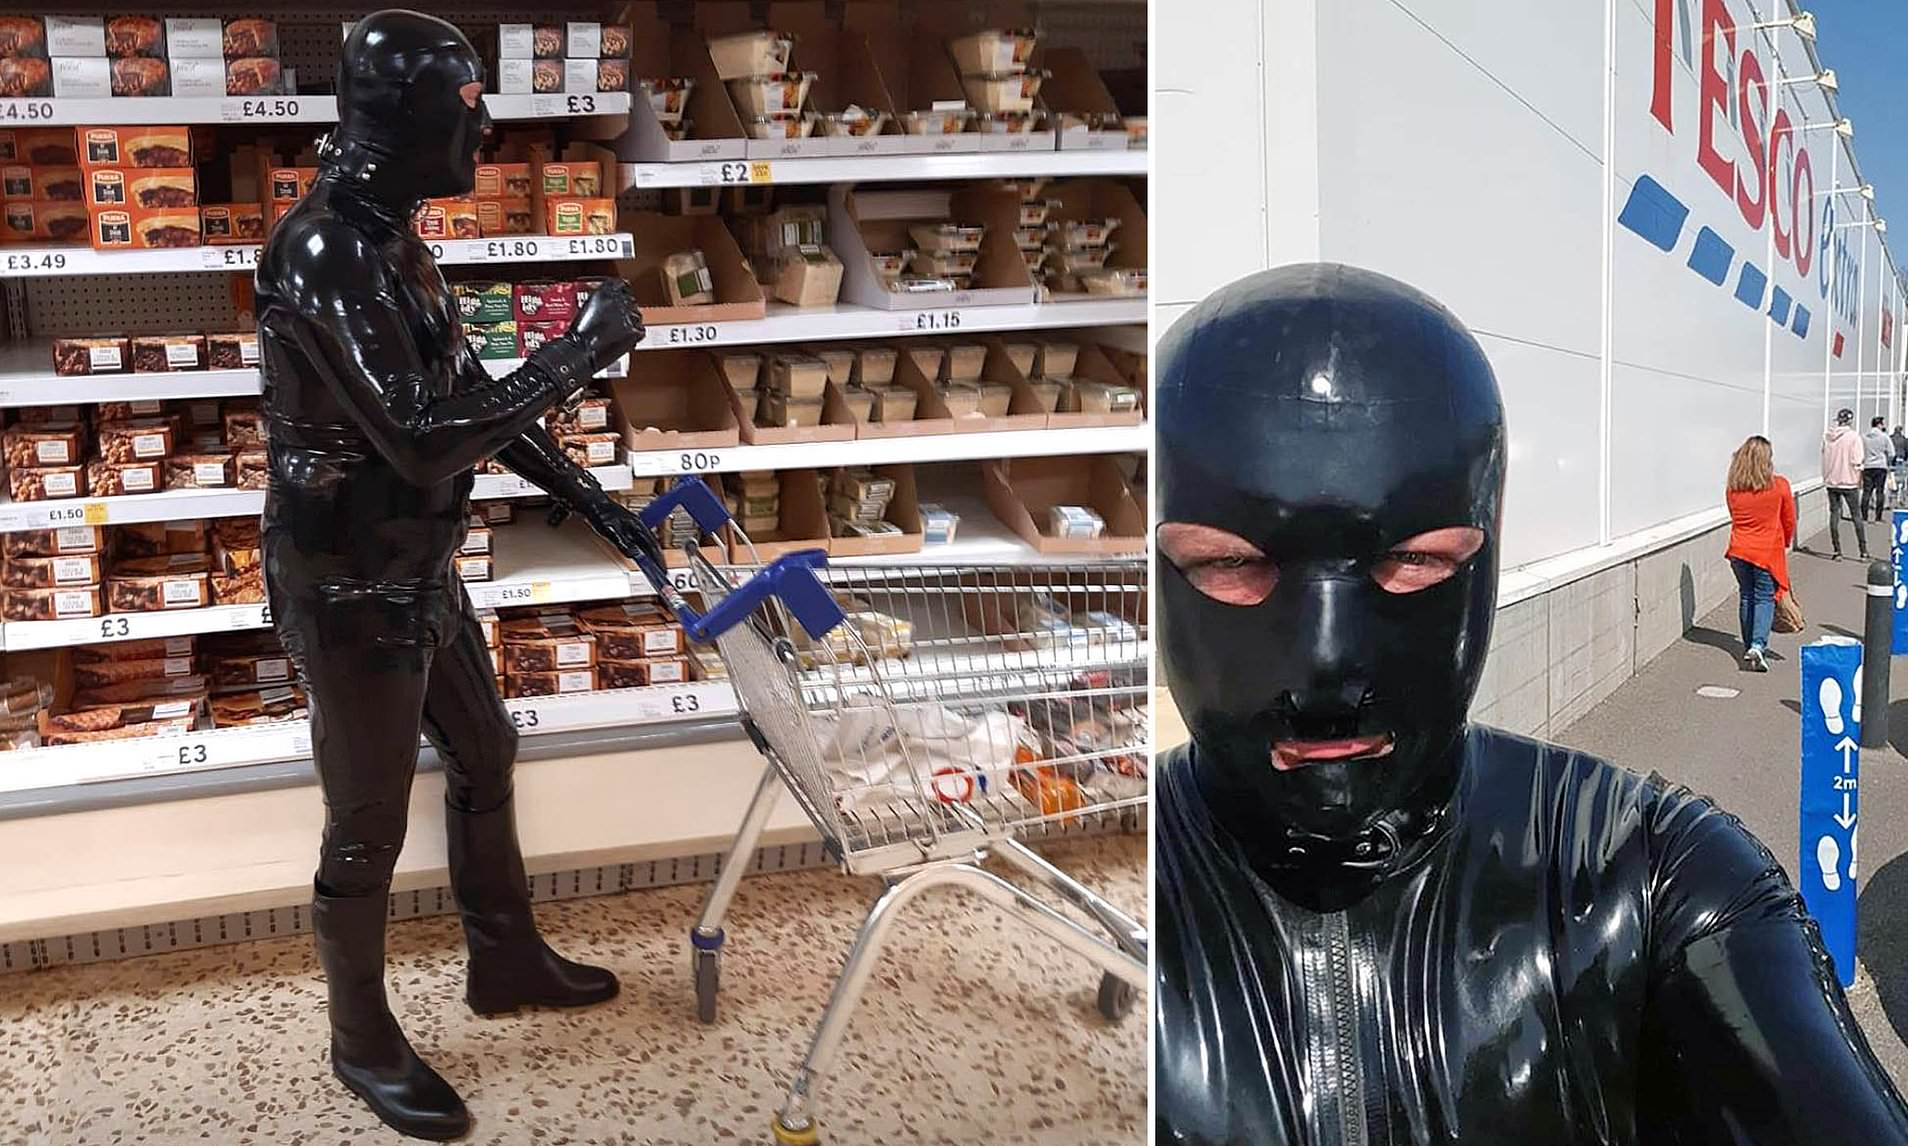 masked man terrorized residents for many years In A latex clad gimp In a village!